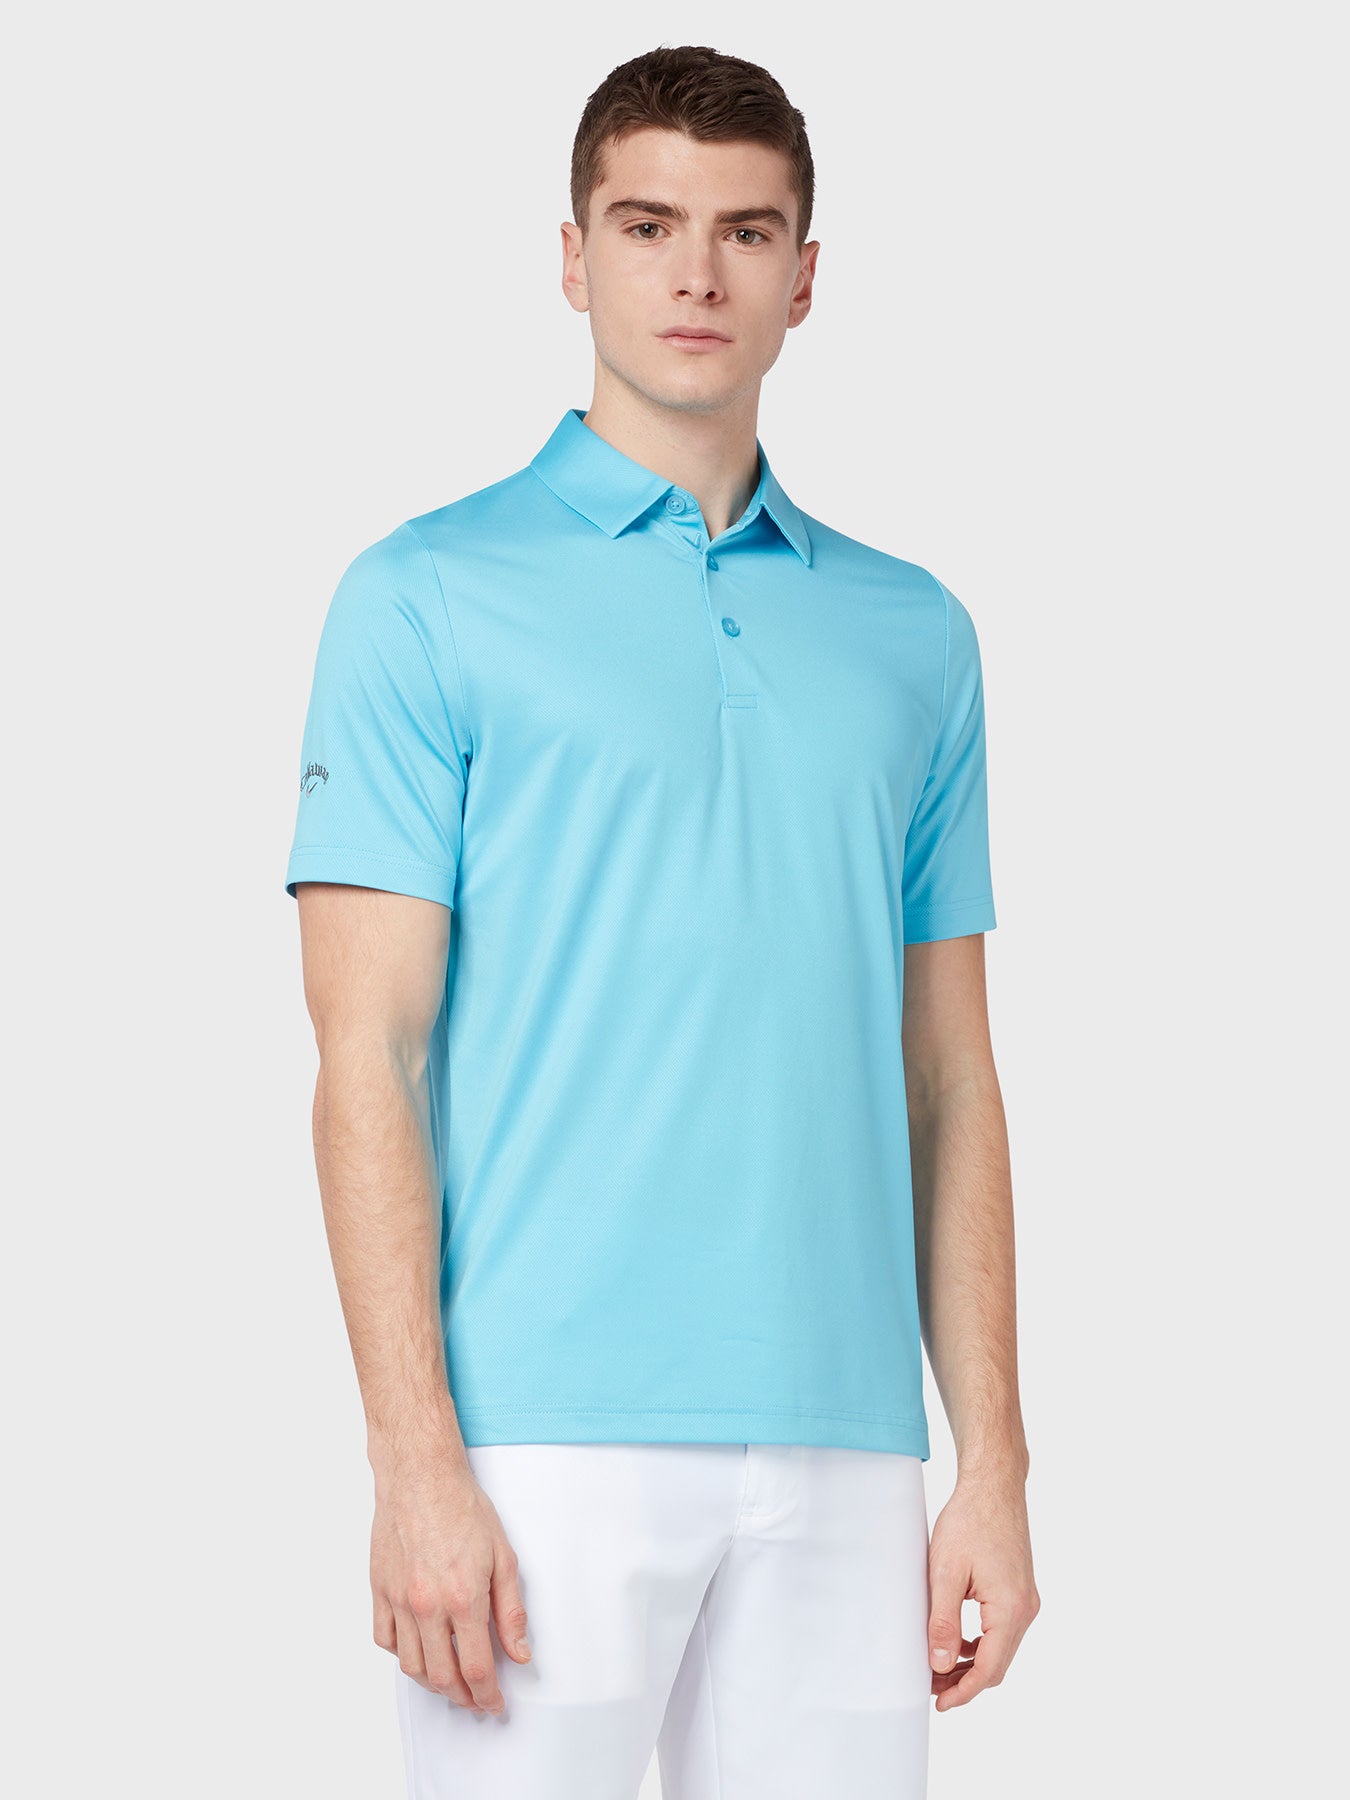 View Swing Tech Tour Polo In Blue Grotto Blue Grotto 4XL information